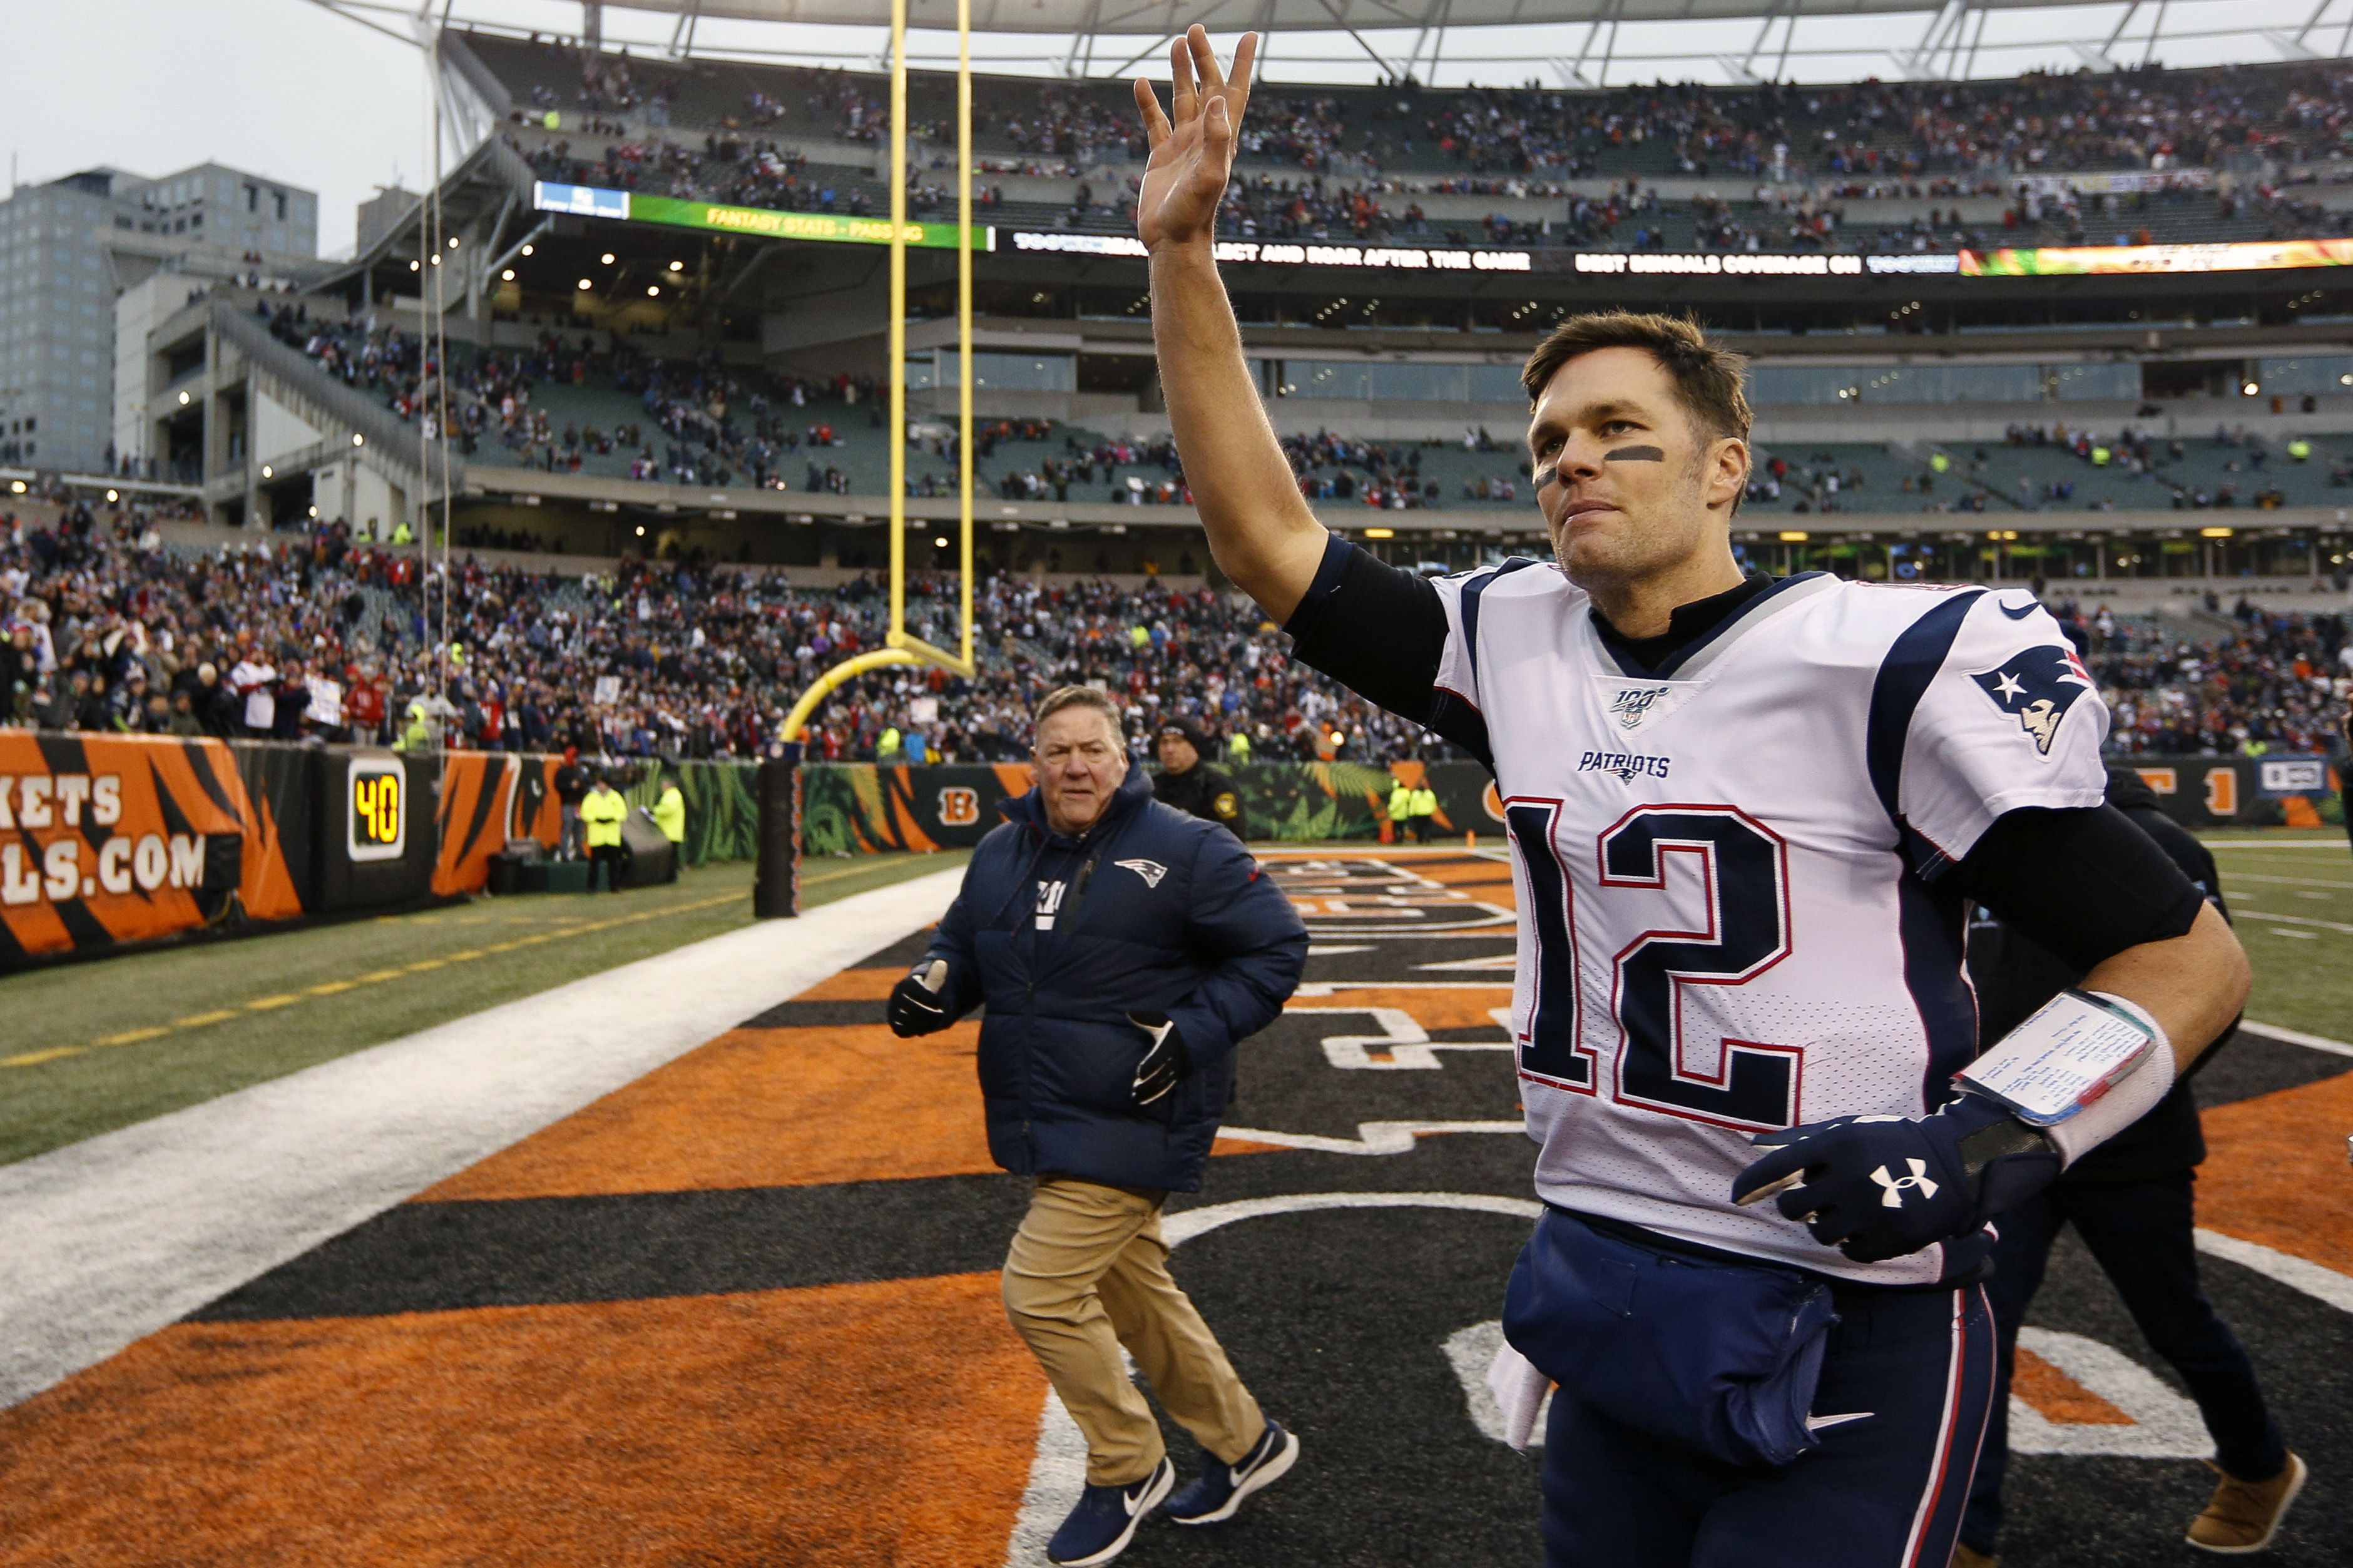 Tom Brady hasn't played in Pro Bowl since 2005, and won't again